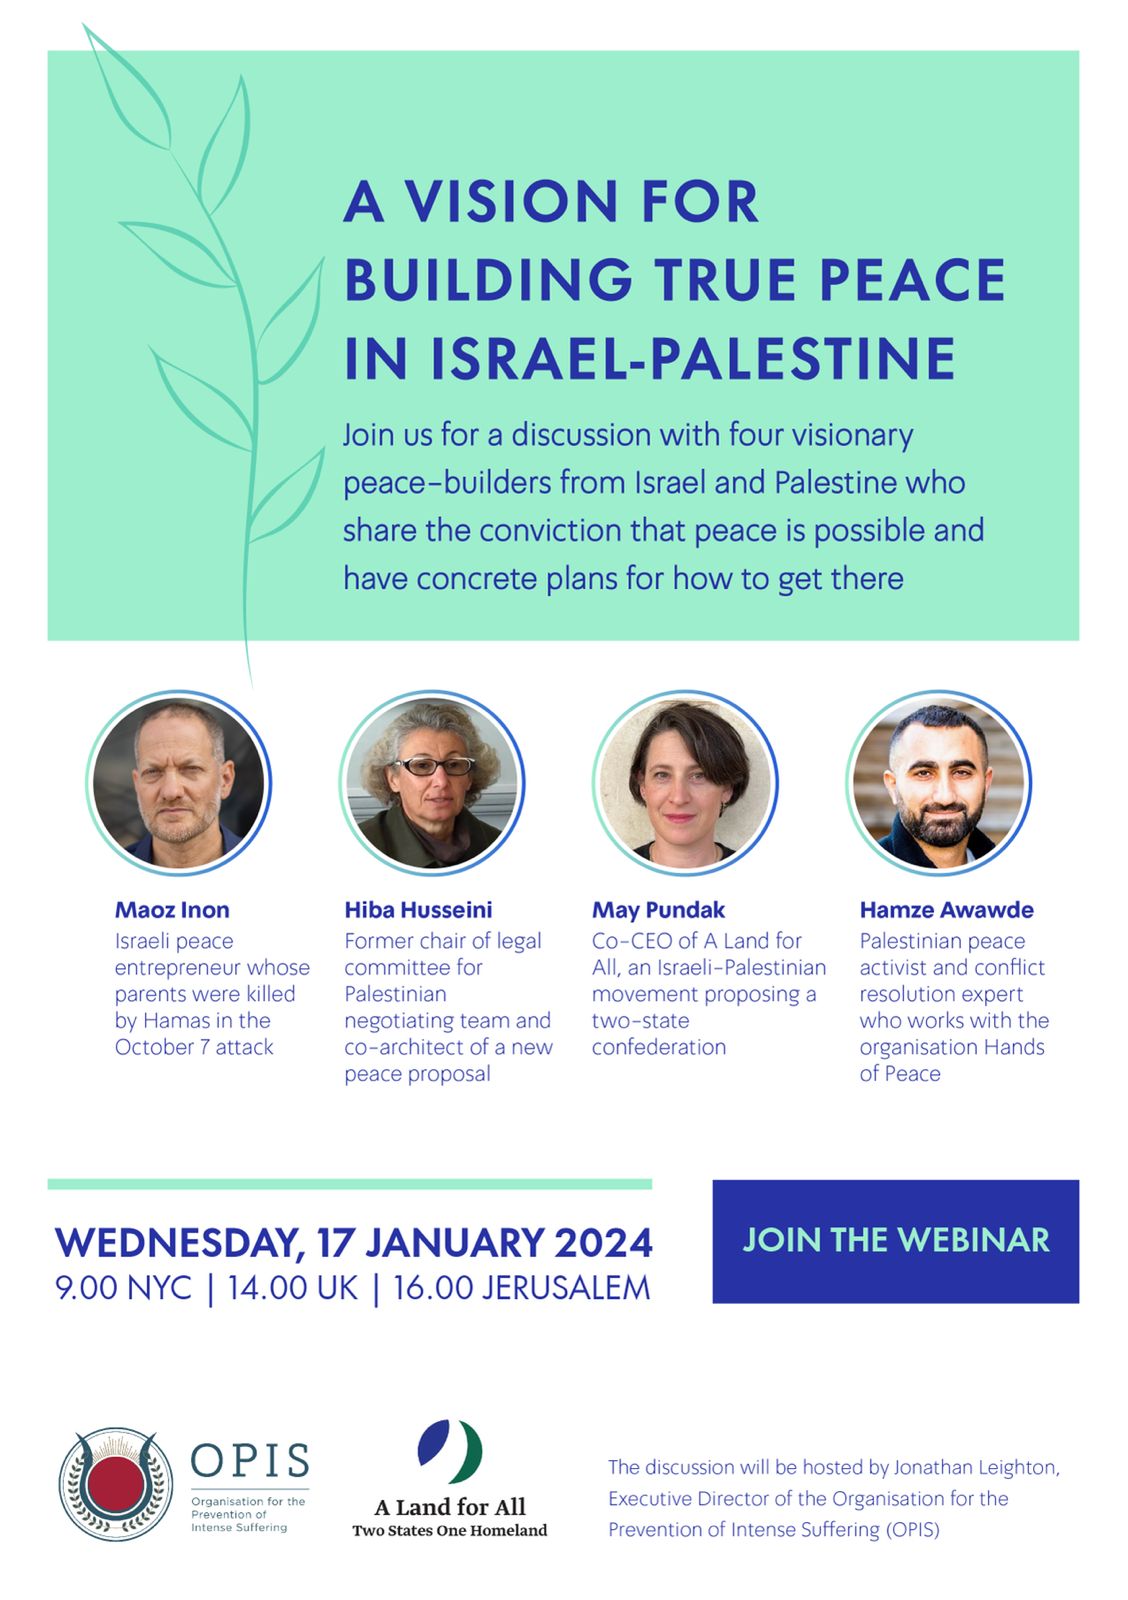 Webinar discussion: a vision for building a compassionate future for Israel and Palestine